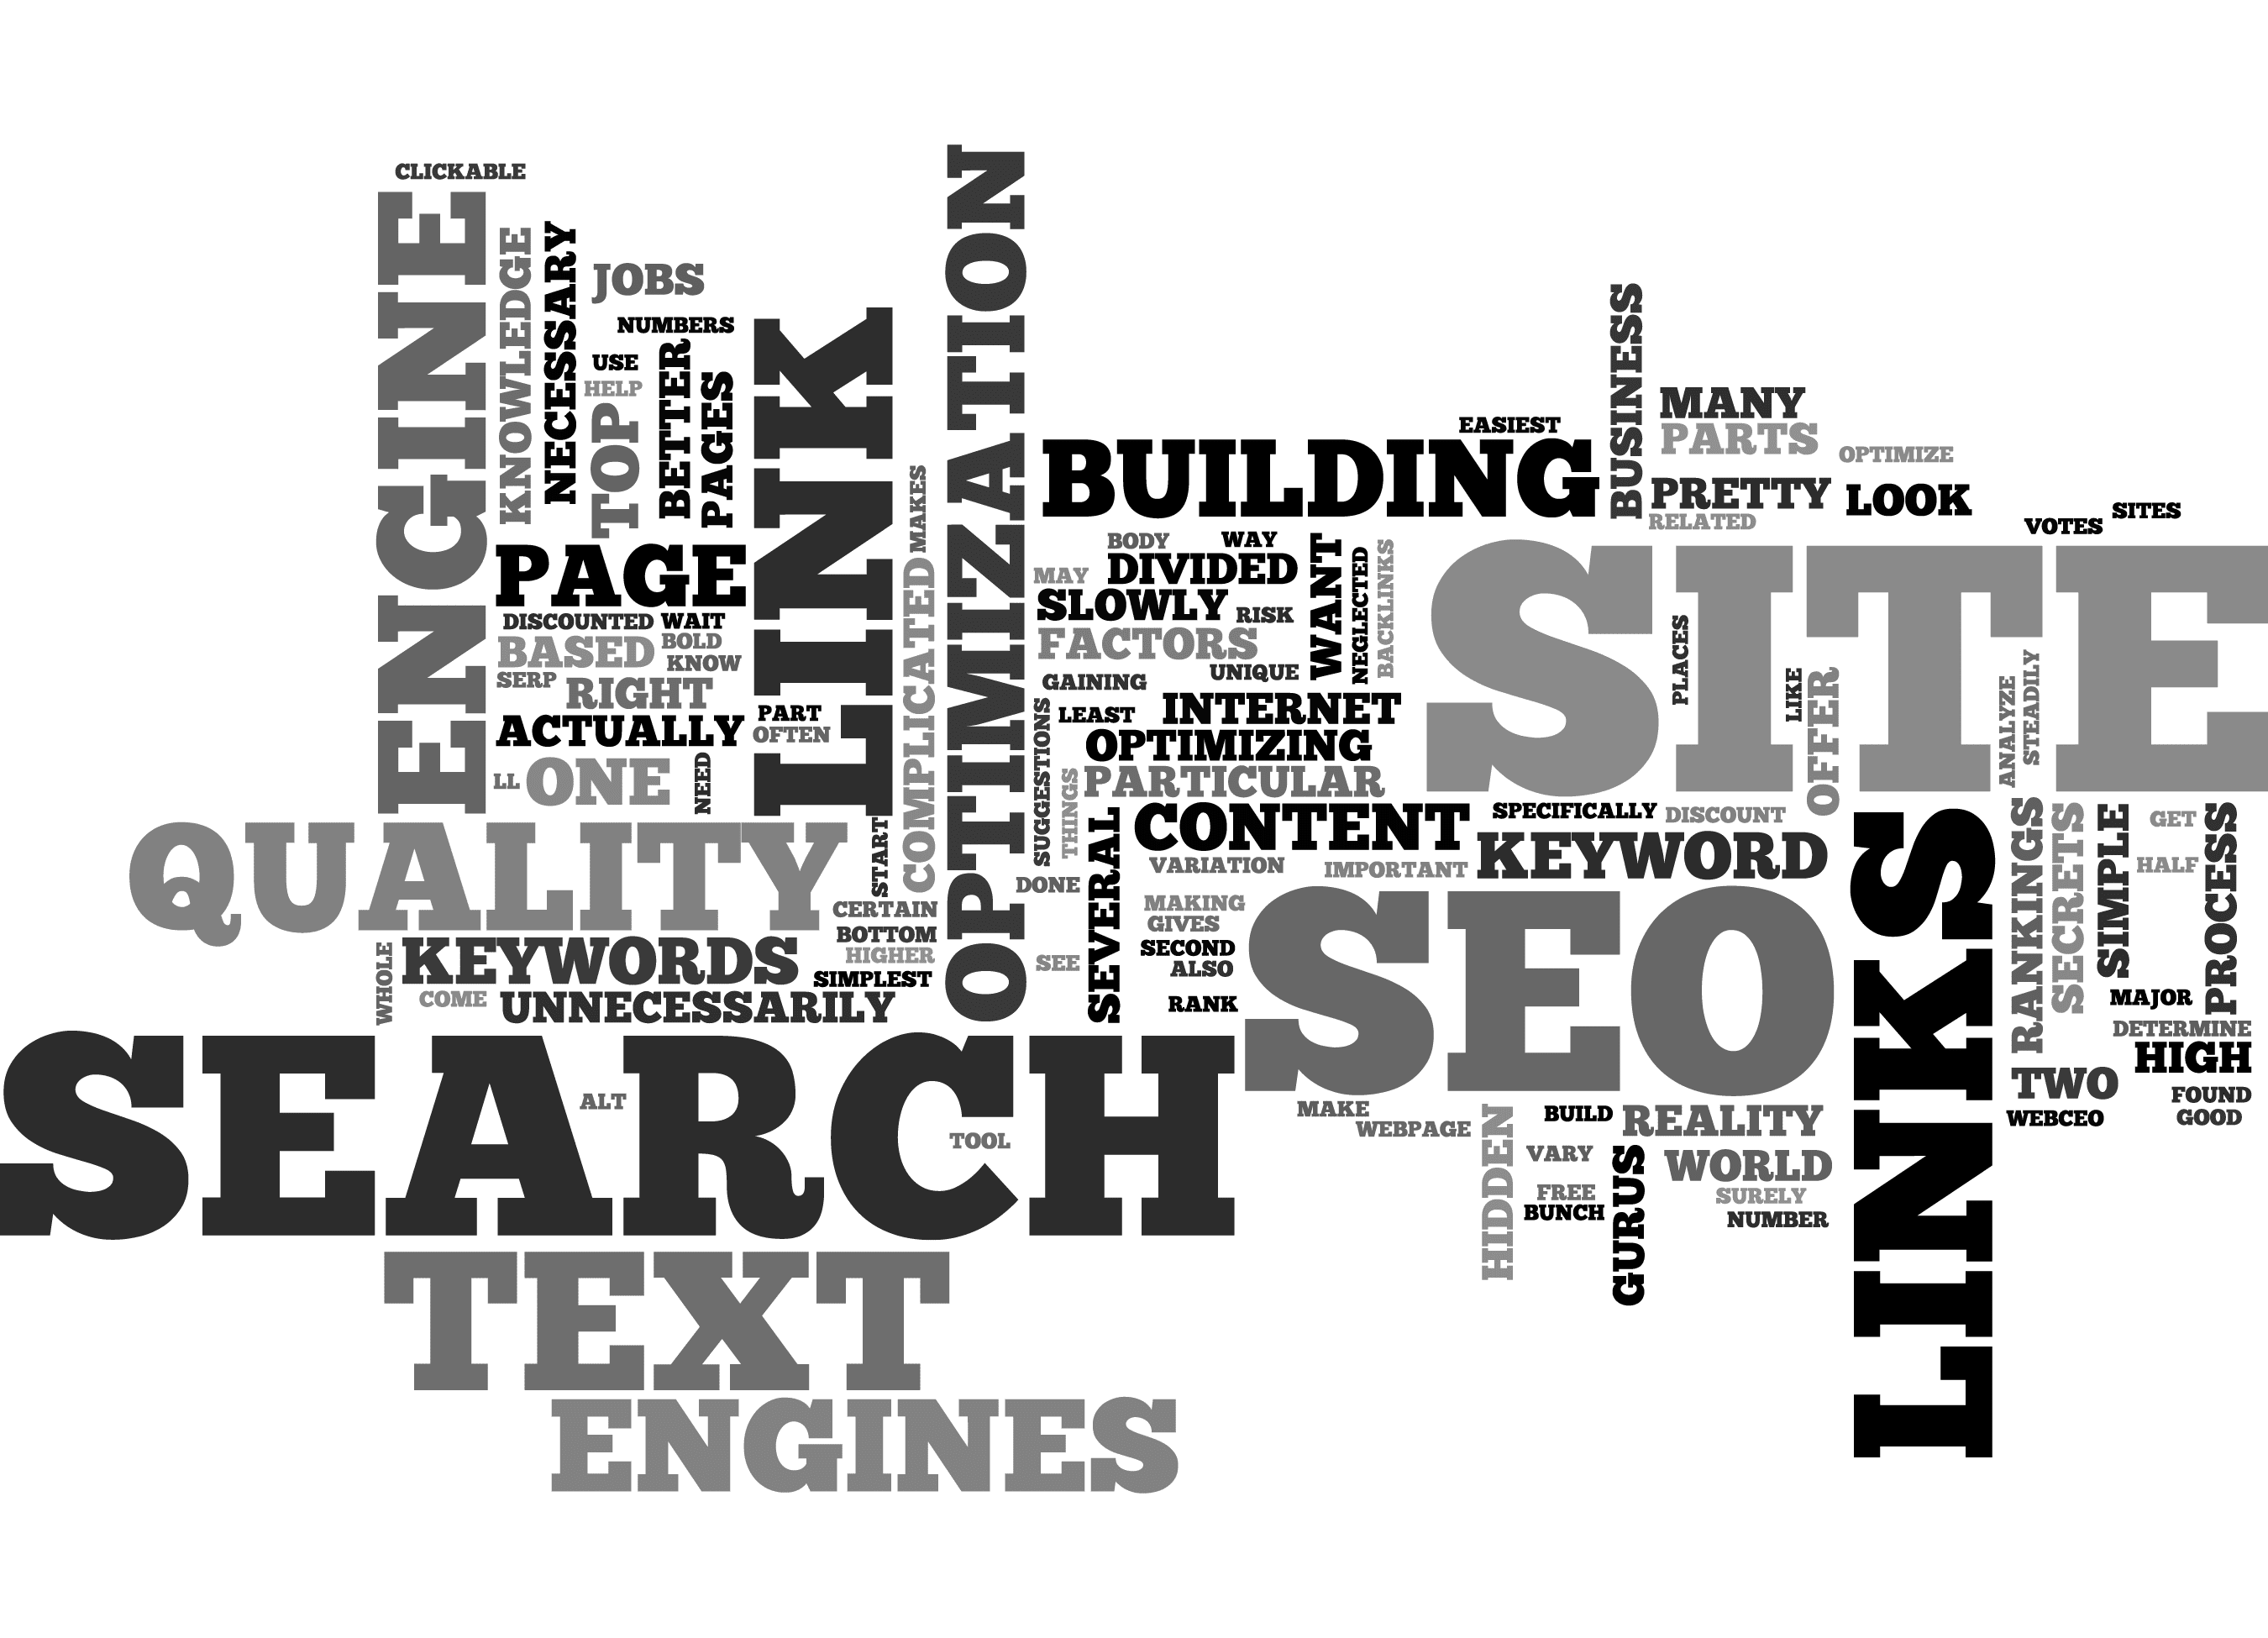 Word cloud for SEO - containing all words that apply to search engine optimization